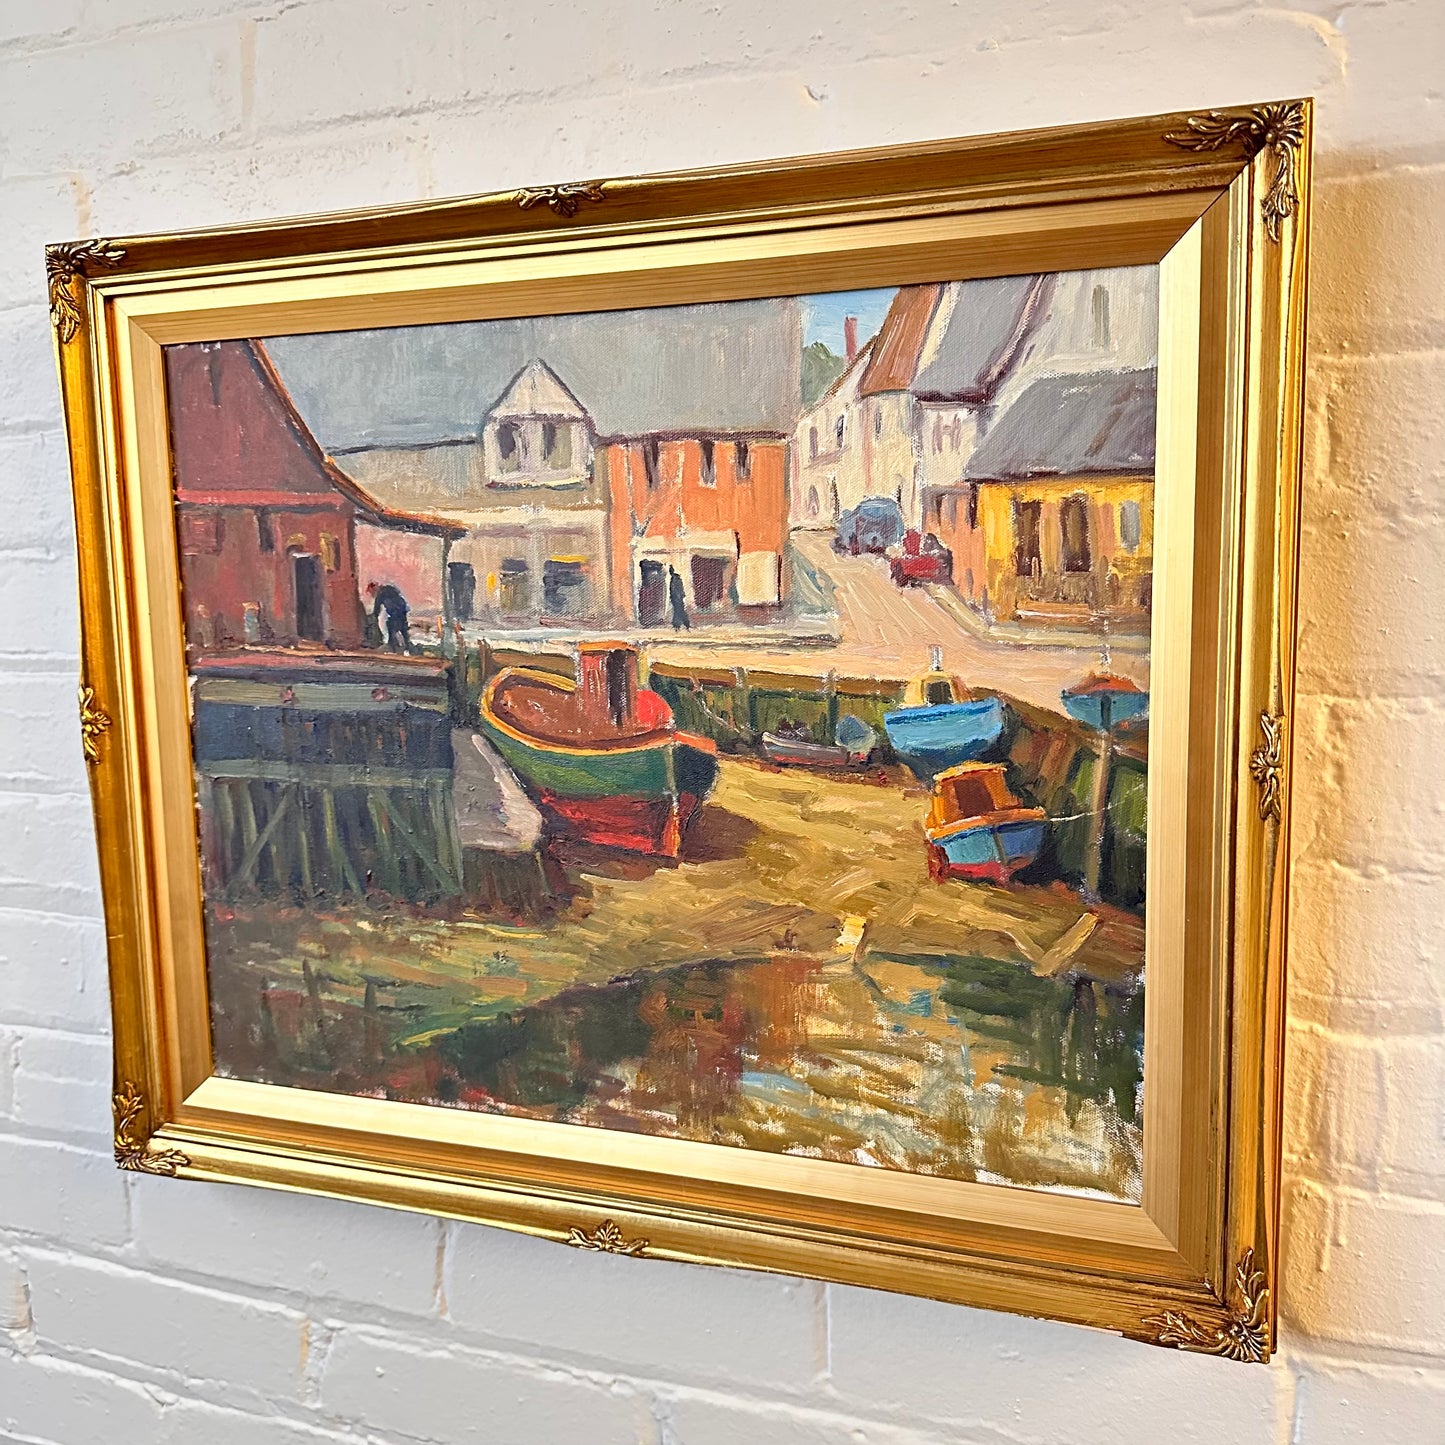 FRAMED PORT PAINTING BY RONALD SEAGER